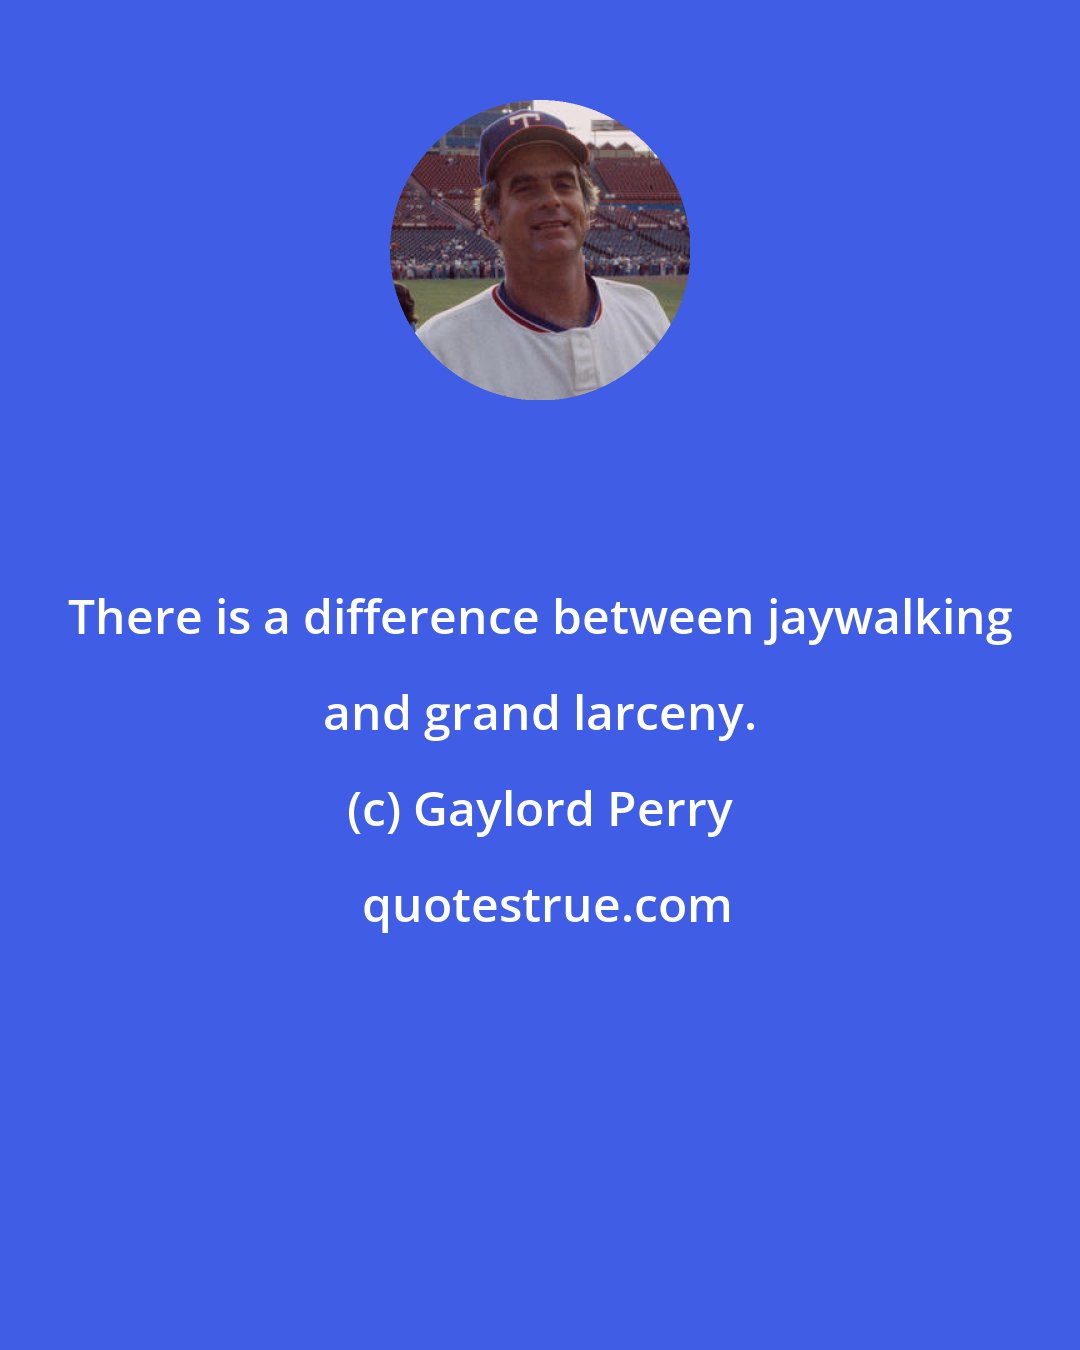 Gaylord Perry: There is a difference between jaywalking and grand larceny.